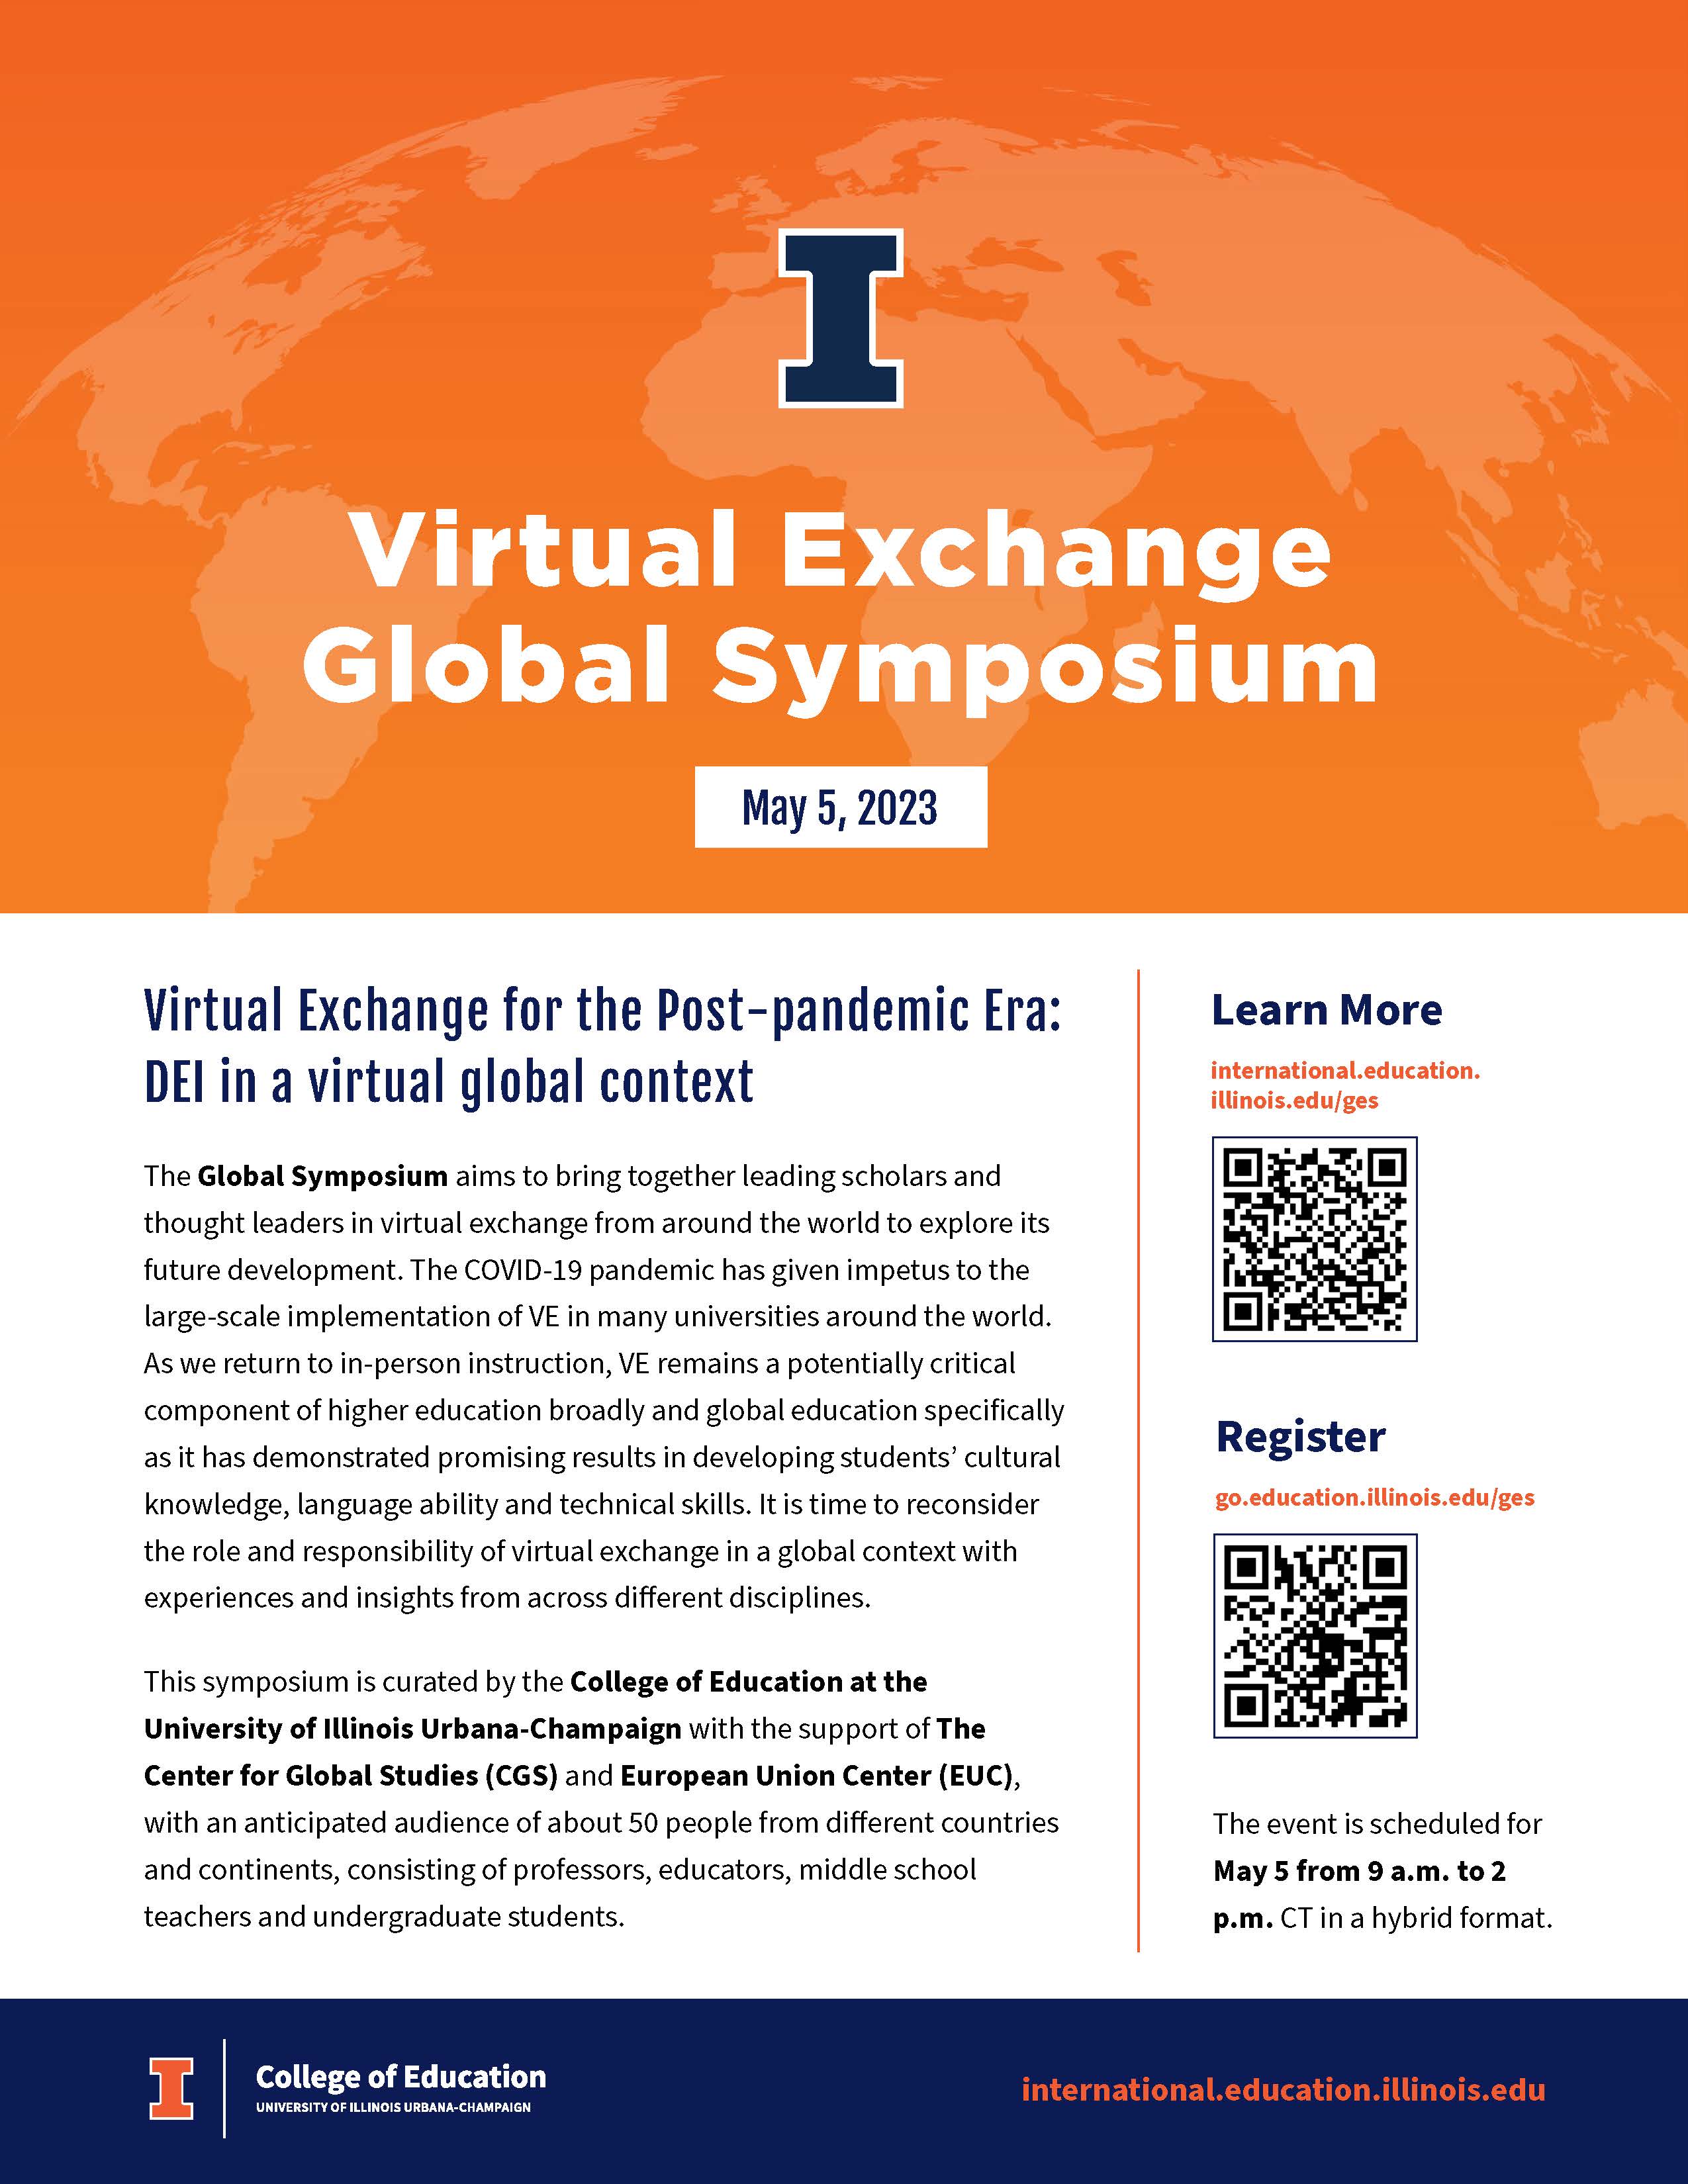 Virtual Exchange for the Post-pandemic Era: DEI in a virtual global context. A Global Symposium